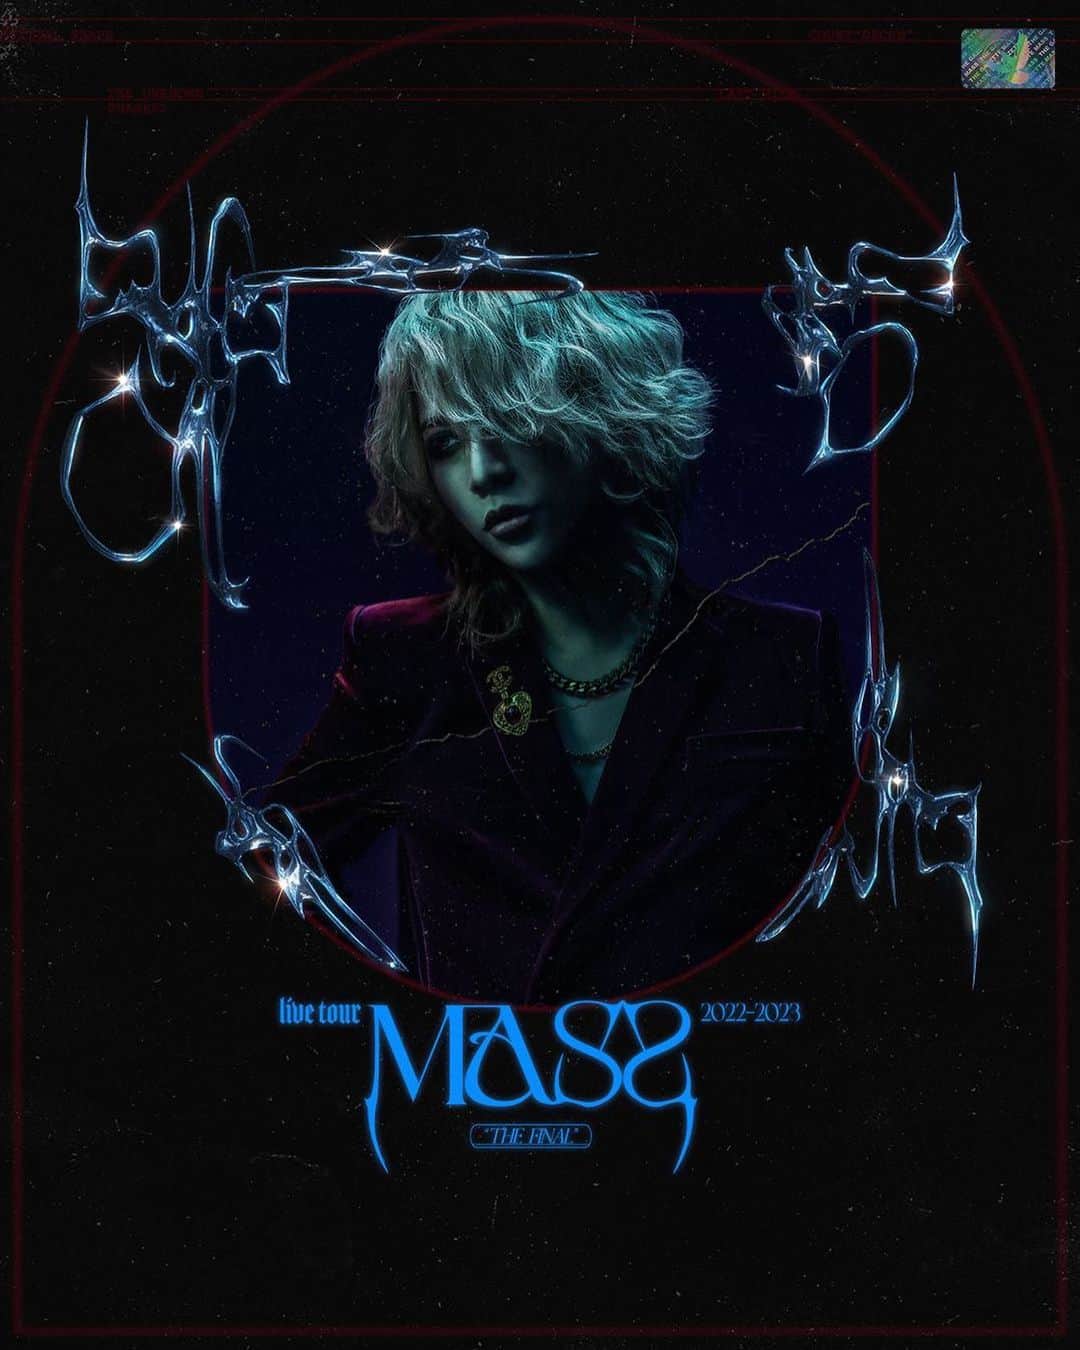 RUKI のインスタグラム：「【MASS "THE FINAL" 日本武道館公演の最新ビジュアル解禁！】  2023年7月15日(土)、日本武道館にて開催される 『the GazettE LIVE TOUR2022-2023 MASS "THE FINAL”』 の最新ビジュアルが解禁✨  本日より本公演チケットのFC.HERESY 2次先行受付・プレイガイド先行受付もスタート🎫 この機会に是非ご利用ください！  the GazettE 10th ALBUM『MASS』の集大成。 その目に焼き付けて、共に最高の夜を過ごしましょう🔥  ■the GazettE LIVE TOUR2022-2023 MASS "THE FINAL" 2023年7月15日(土) 日本武道館 OPEN16:30/START17:30  [チケット情報] 全席指定 前売￥9,600(税込) ※未就学児入場不可、諸サービス手数料別  ▼チケット情報等の詳細は公演特設ページをチェック！ https://the-gazette.com/2023_mass_thefinal/  ＝＝＝＝＝＝＝  【The new visual for MASS "THE FINAL" at Nippon Budokan concert has been unveiled!】  It will be held at Nippon Budokan on Saturday, July 15, 2023. 『the GazettE LIVE TOUR2022-2023 MASS "THE FINAL"』 The new visual has been unveiled!  From today, FC.HERESY 2nd pre-registration and play guide pre-registration for this live ticket will also start! ! Please take advantage of this opportunity!  The culmination of the GazettE 10th ALBUM "MASS". Burn it into your eyes and let's spend the best night together!  ■the GazettE LIVE TOUR2022-2023 MASS "THE FINAL" July 15th (Sat), 2023 Nippon Budokan OPEN16:30/START17:30  [TICKET INFORMATION] All seats reserved : Advance ¥9,600(tax included) *No admission for preschool children. *Service fee not included.  ▼For ticket information, please check the special page! https://the-gazette.com/2023_mass_thefinal/  #theGazettE #TOURFINAL #MASS #日本武道館」